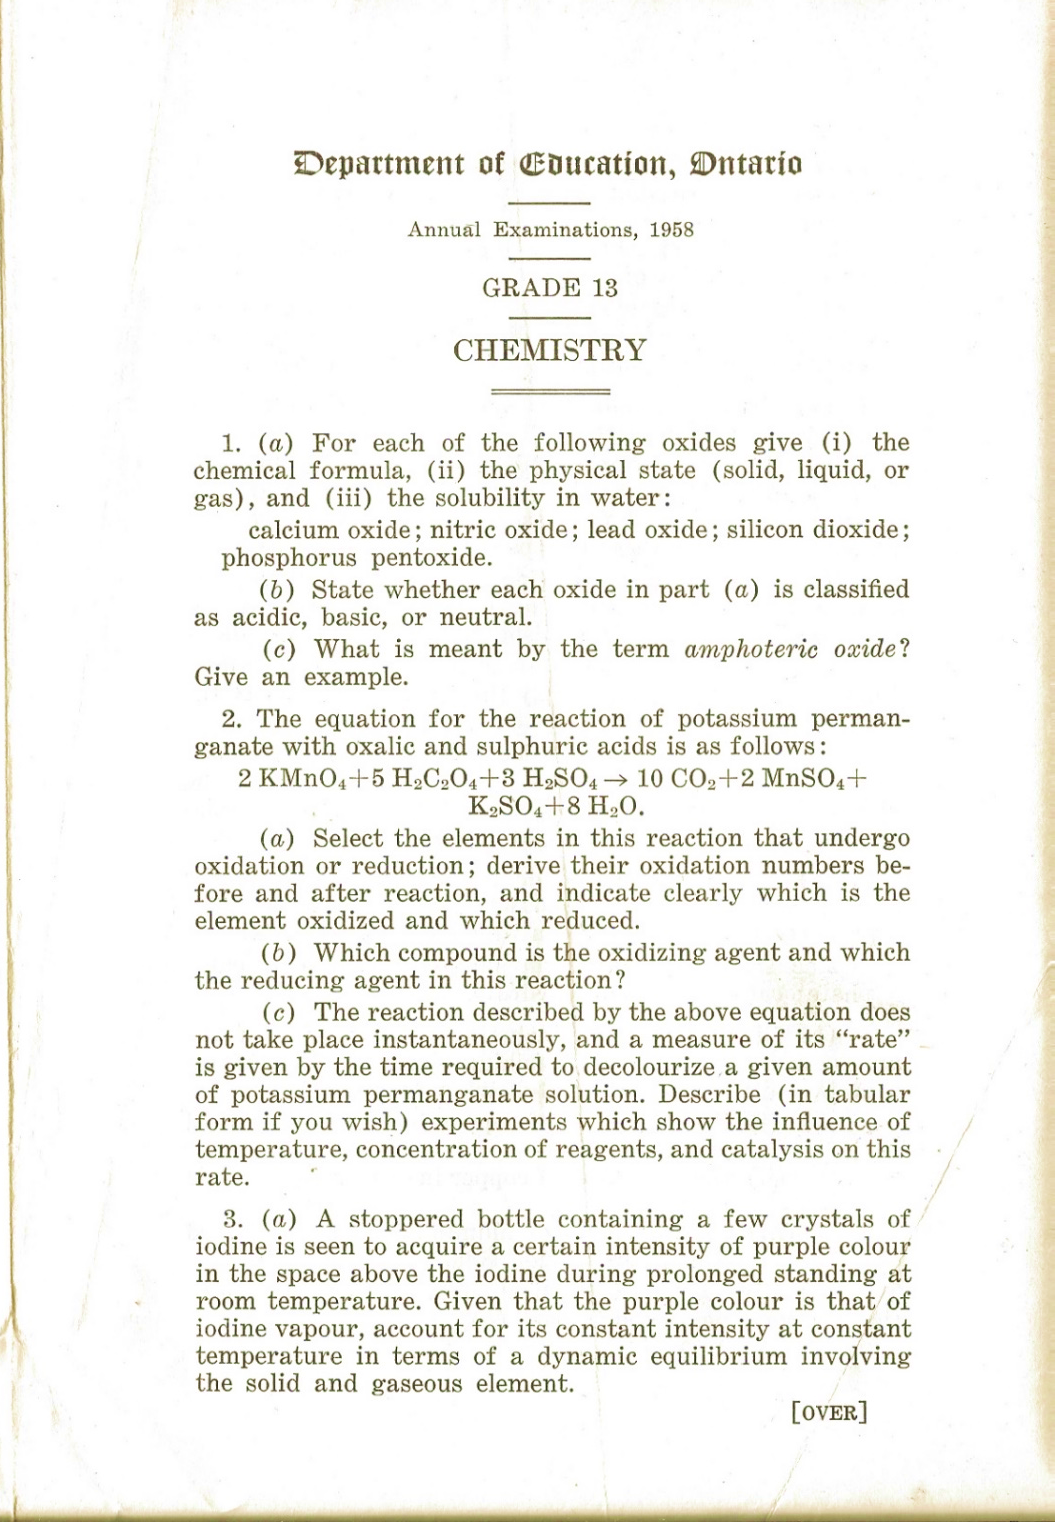 page 1 of an old 1958 Department of Education, Ontario grade 13 Chemistry exam 